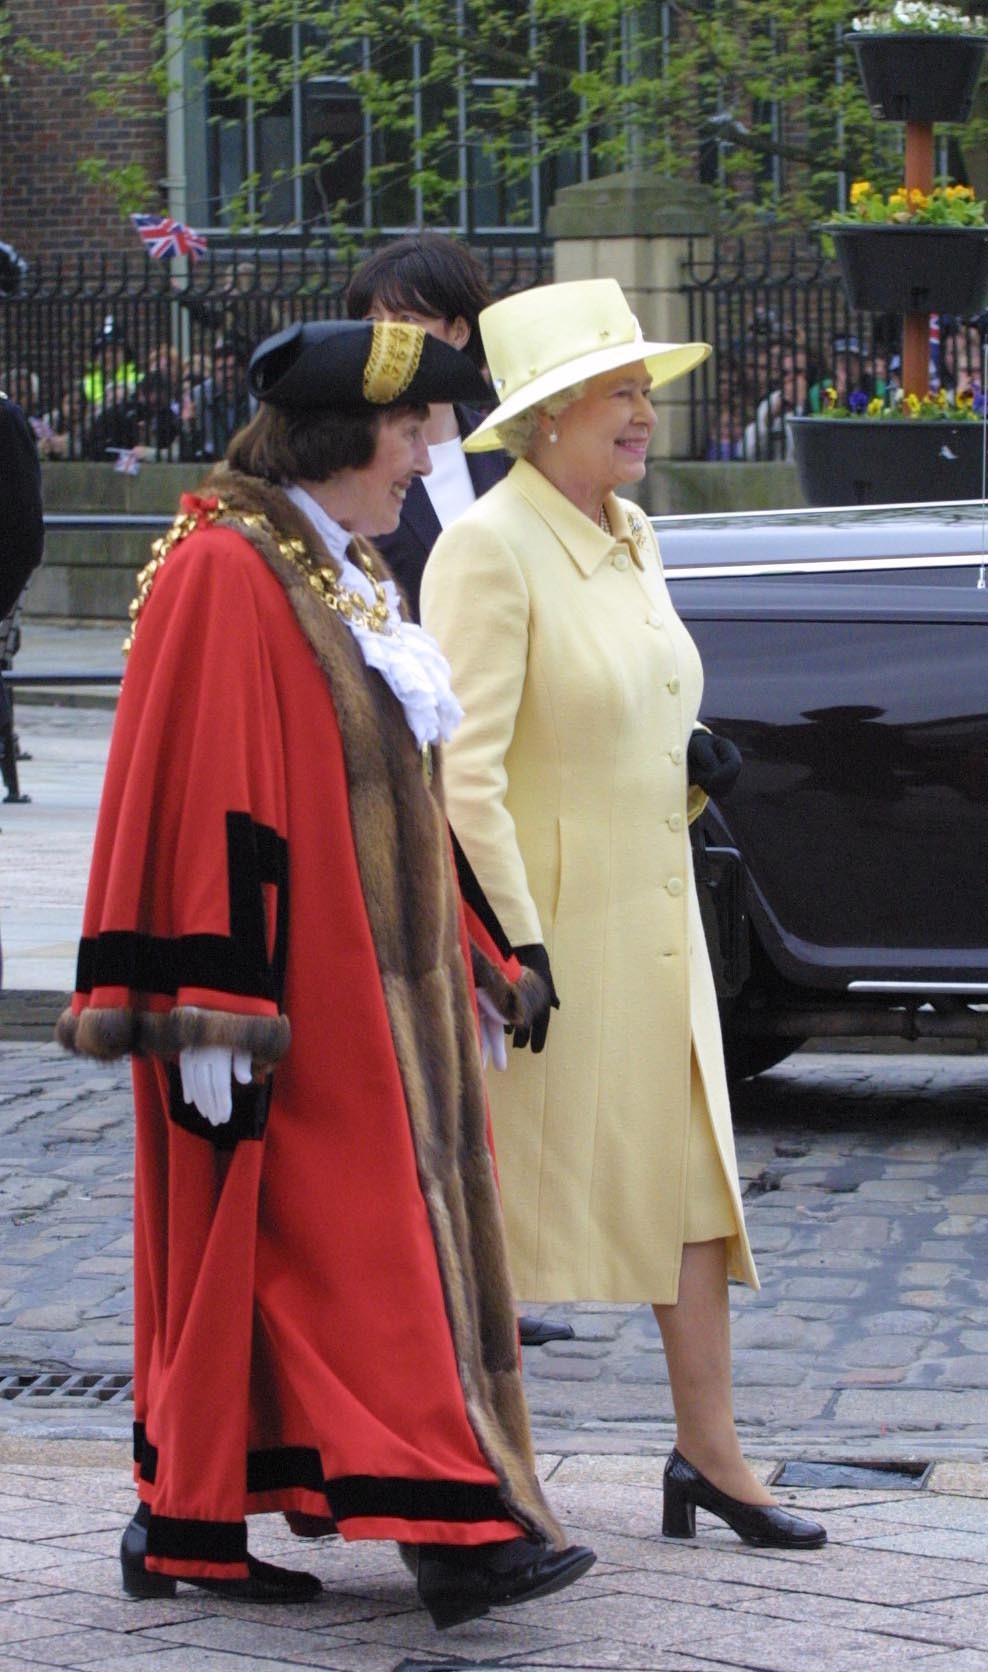 Darlington Mayor Isobel Hartley takes the Queen on a tour of the Town Centre during the Queen's Golden Jubilee tour of the region